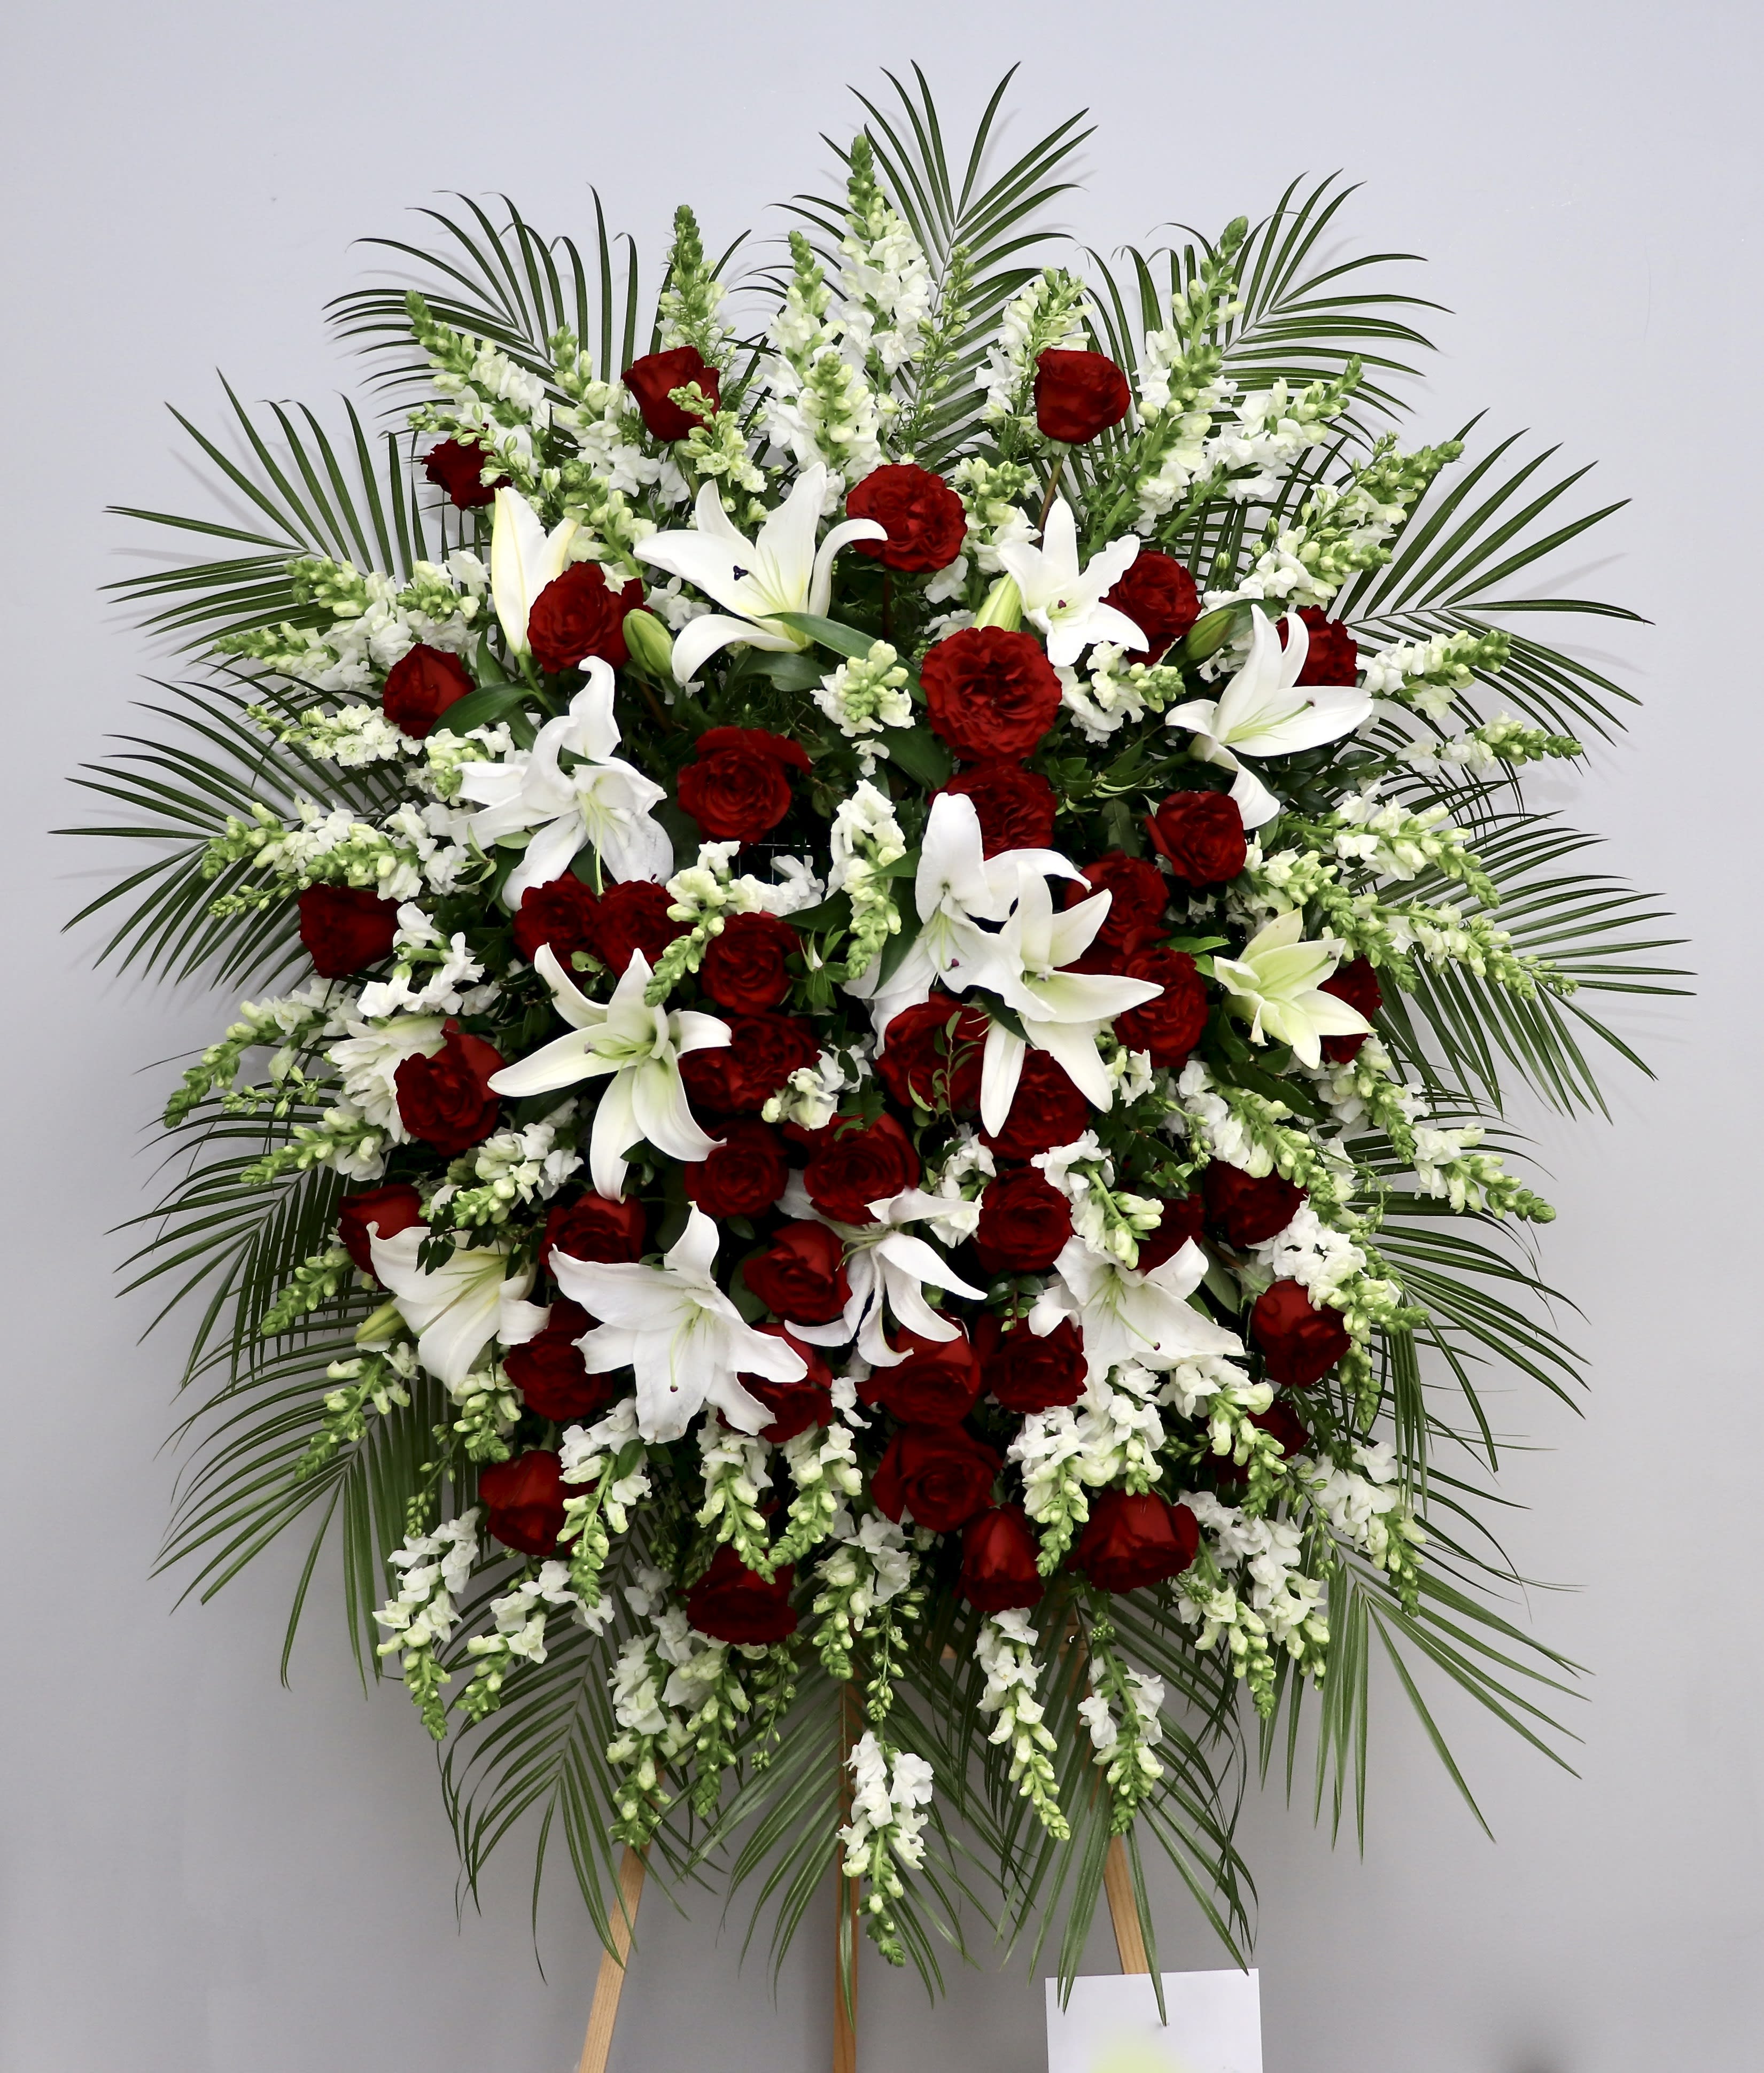 Ruby Red Spray - This spray combines red roses, lilies and snapdragons to create an elegant sympathy arrangement.   We include easel, printed banner and delivery (some fees may apply).  Standard size is 30'' wide, deluxe is 36'', and premium is 42''.